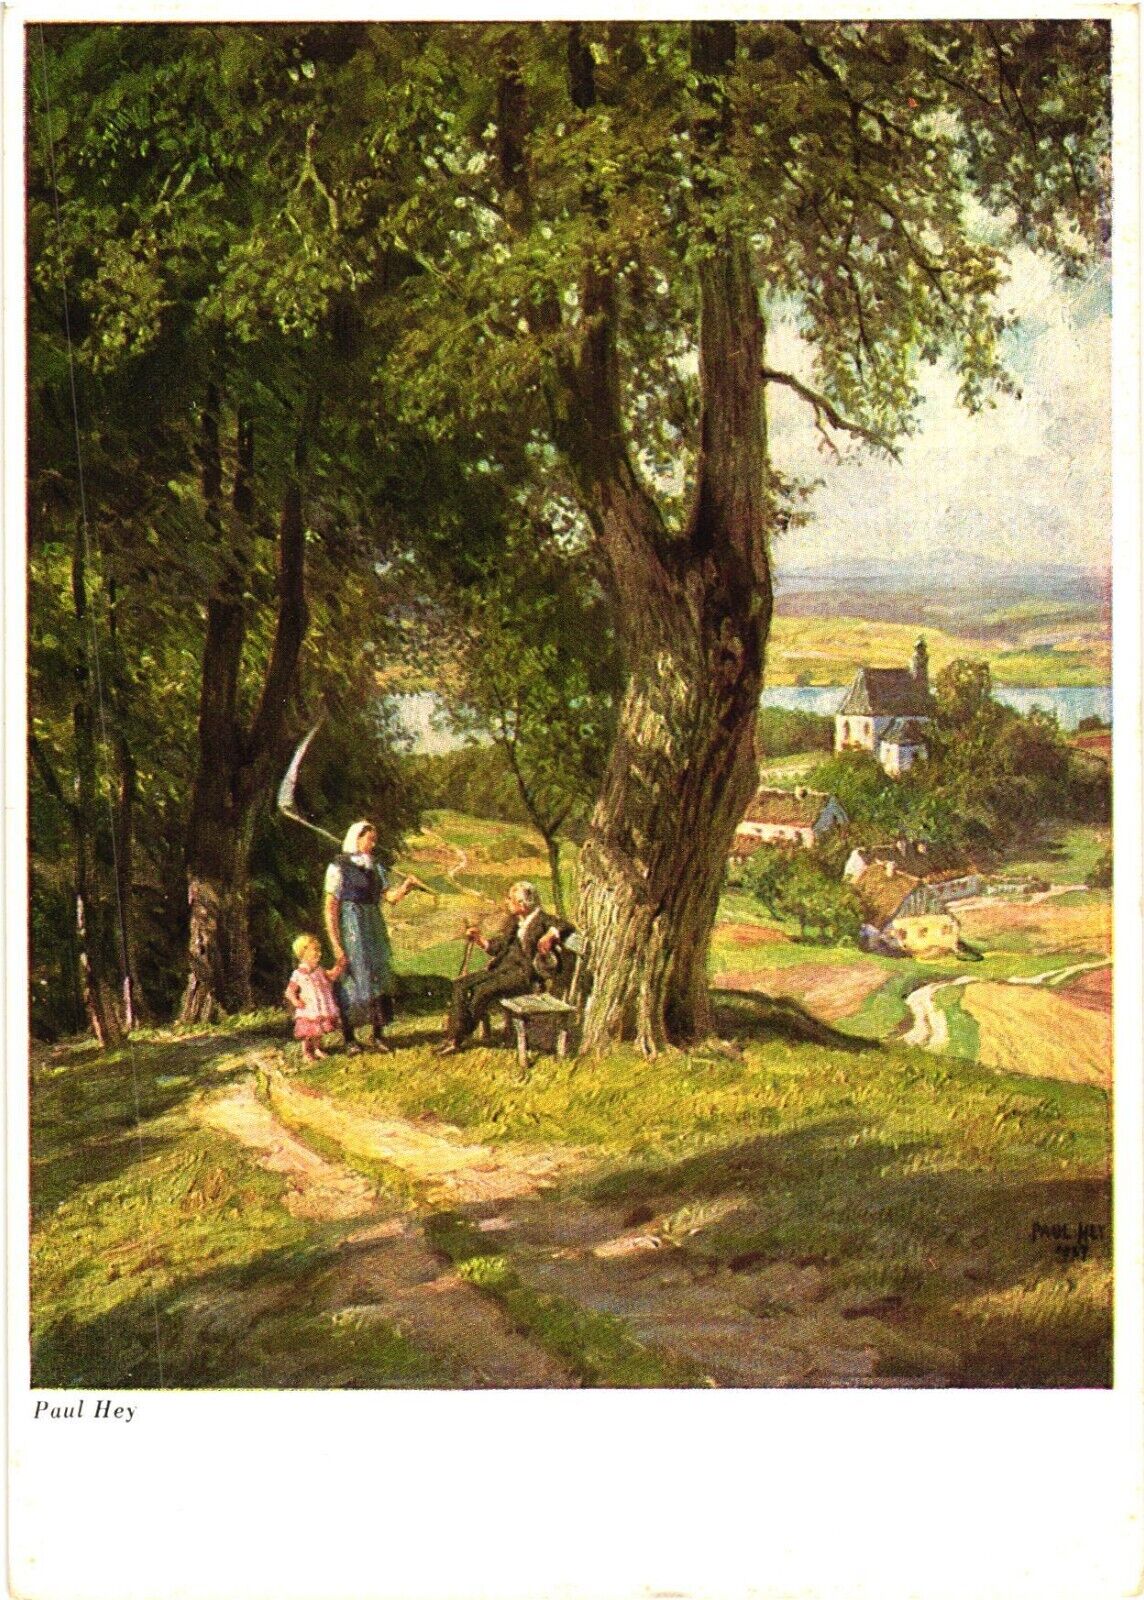 A Shady Place-At The Edge of The Forest, Paul Hey Art Postcard